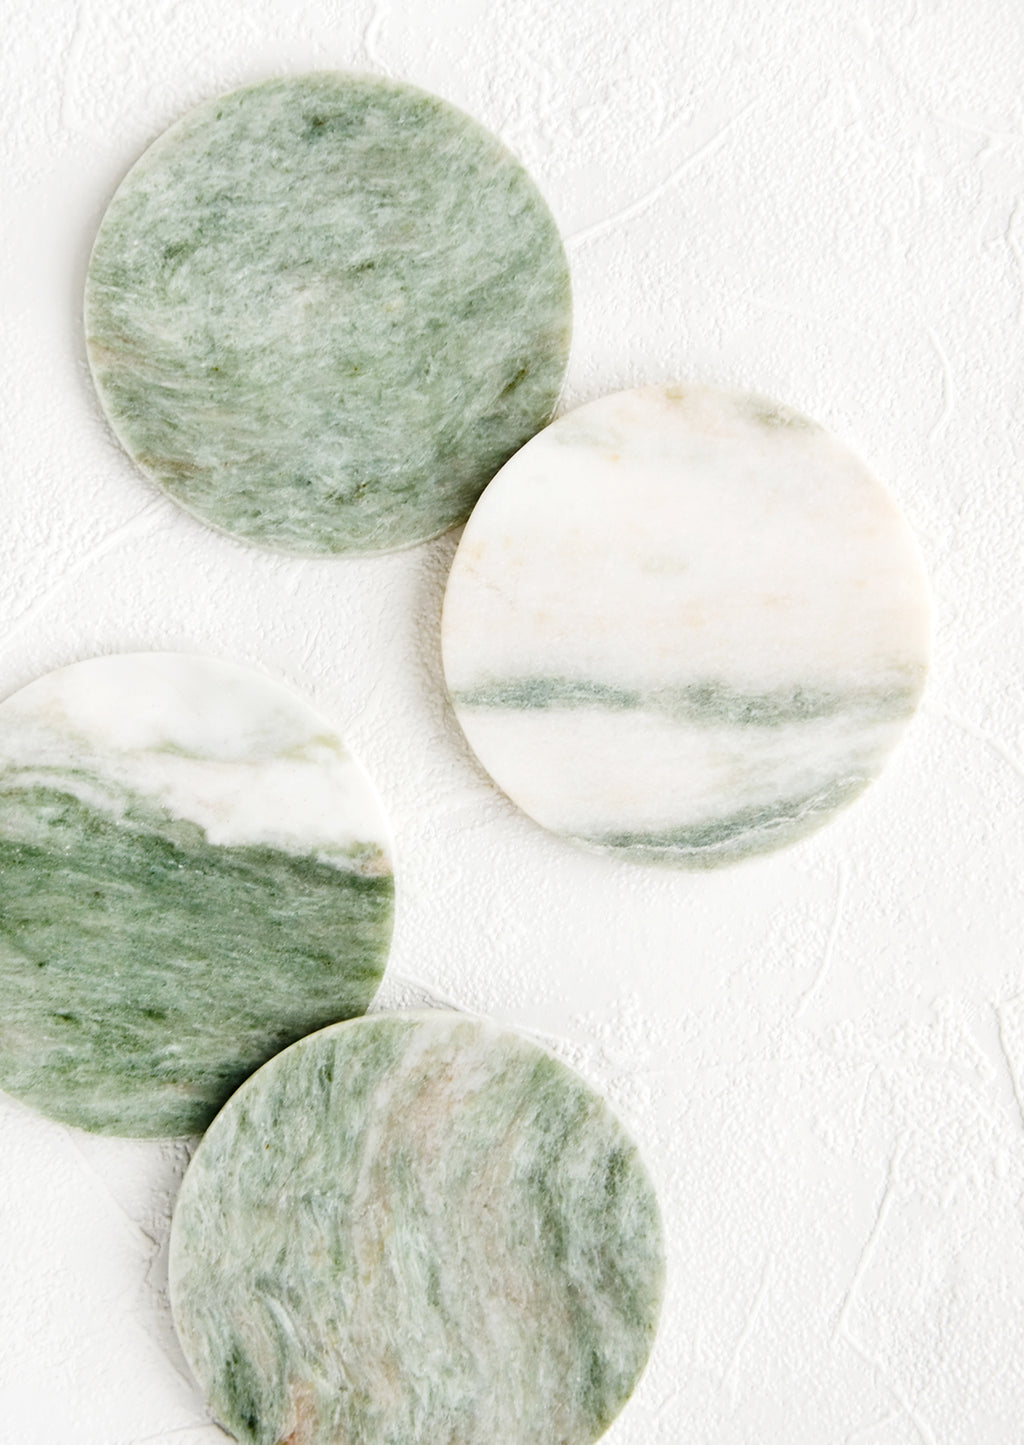 Round: Set of 4 round coasters in green and white marbled "lady onyx"